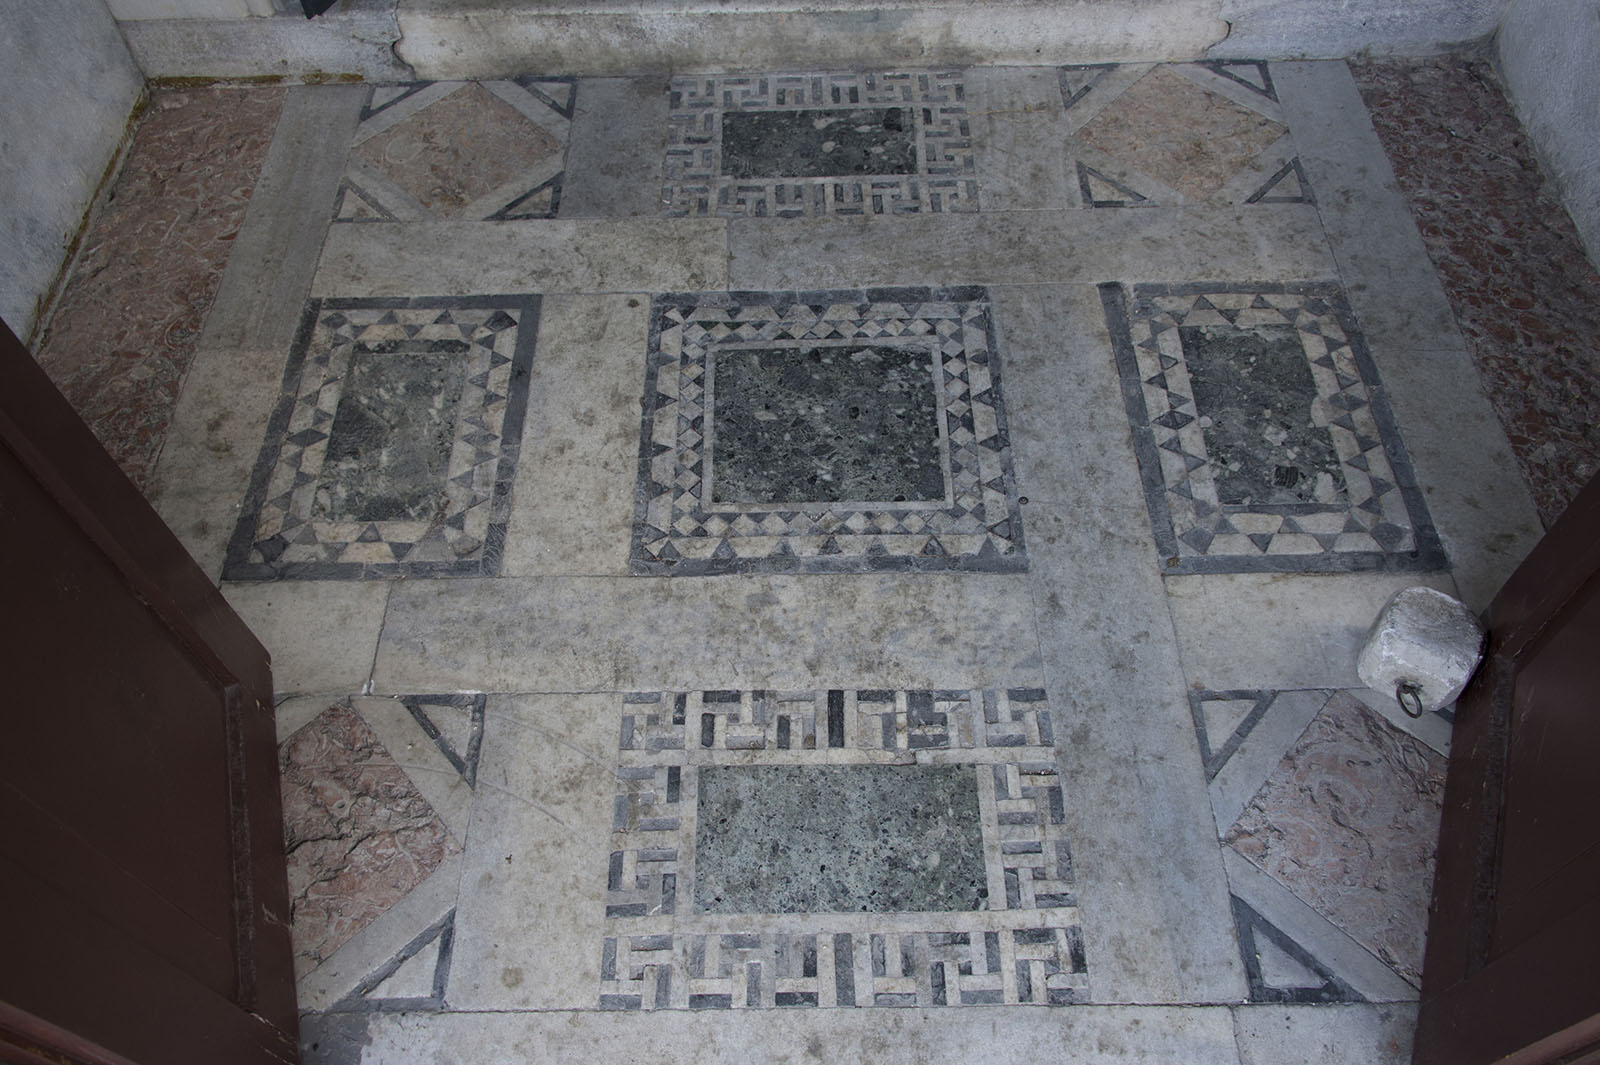 Istanbul Şehzade complex Tomb of Şehzade Mehmed interior Entrance pavement in 2015 1364.jpg